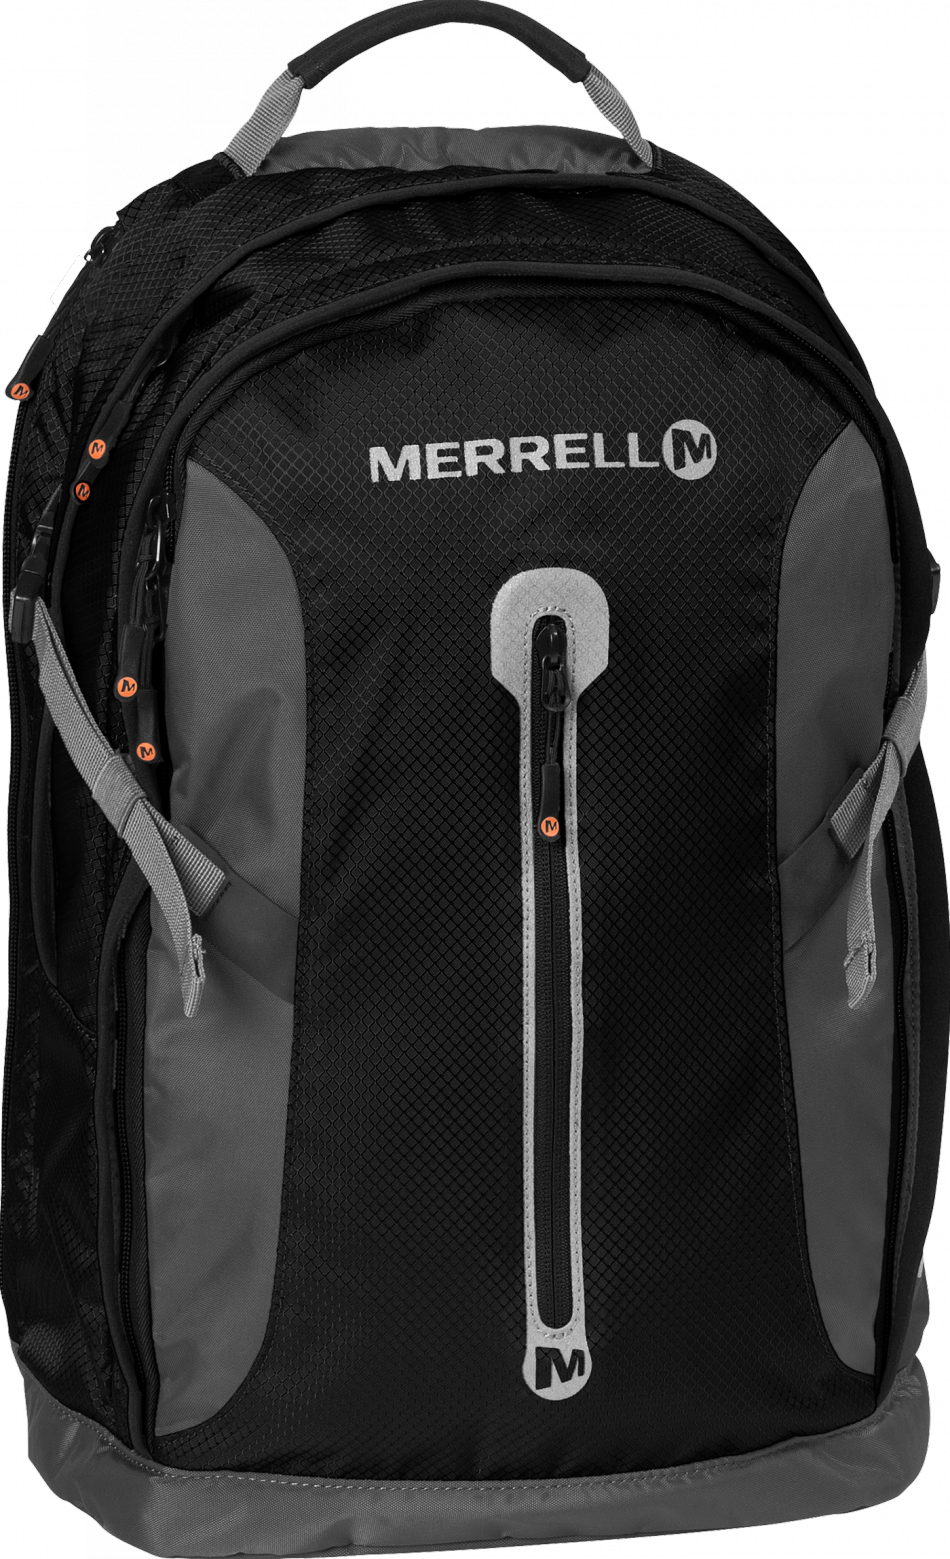 Medium - Merrell Townsend Laptop Backpack Black One Size (950x1559), Png Download